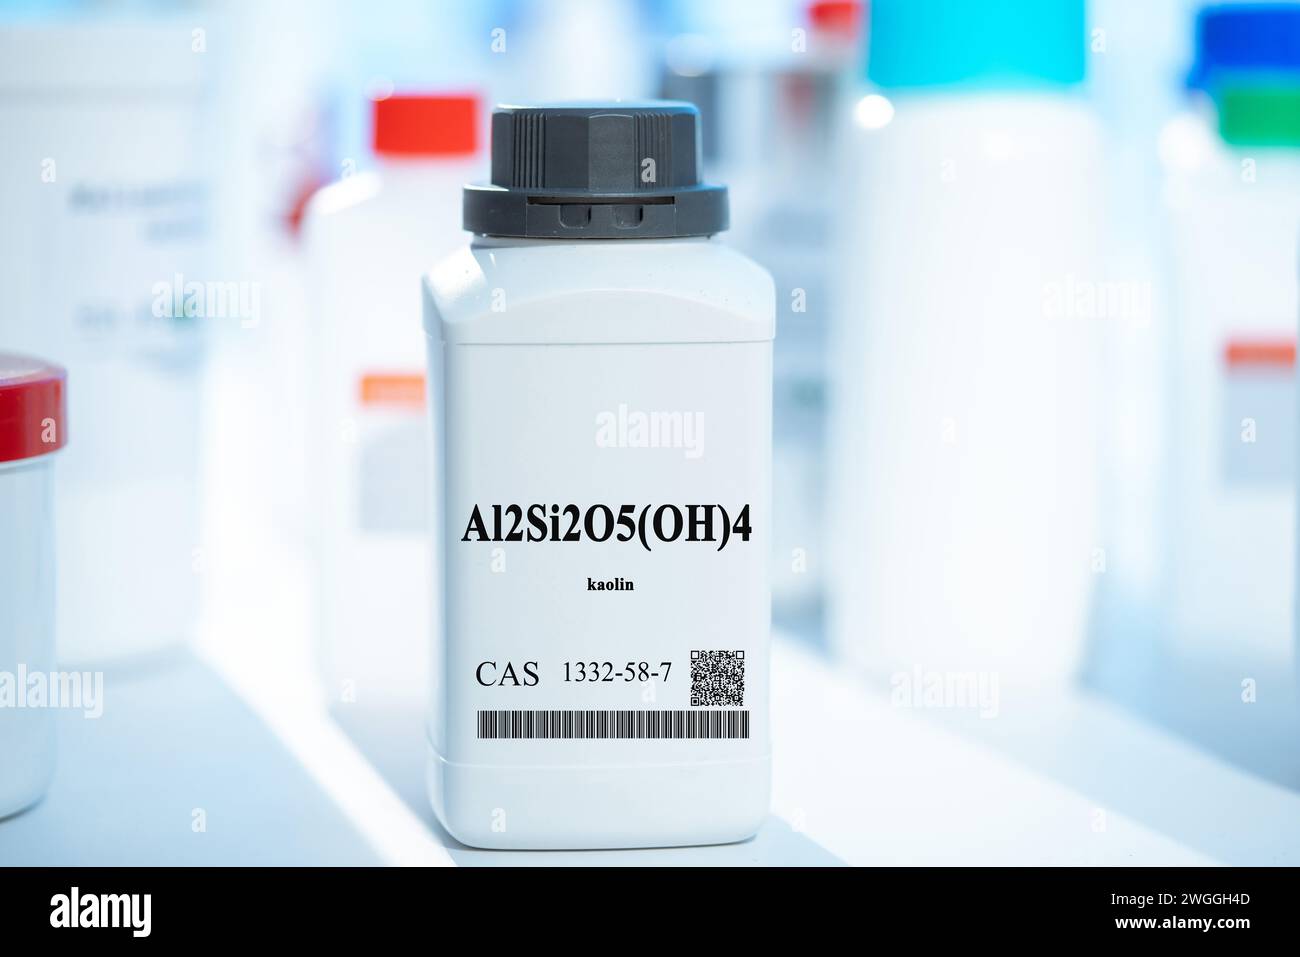 Al2Si2O5(OH)4 kaolin CAS 1332-58-7 chemical substance in white plastic laboratory packaging Stock Photo